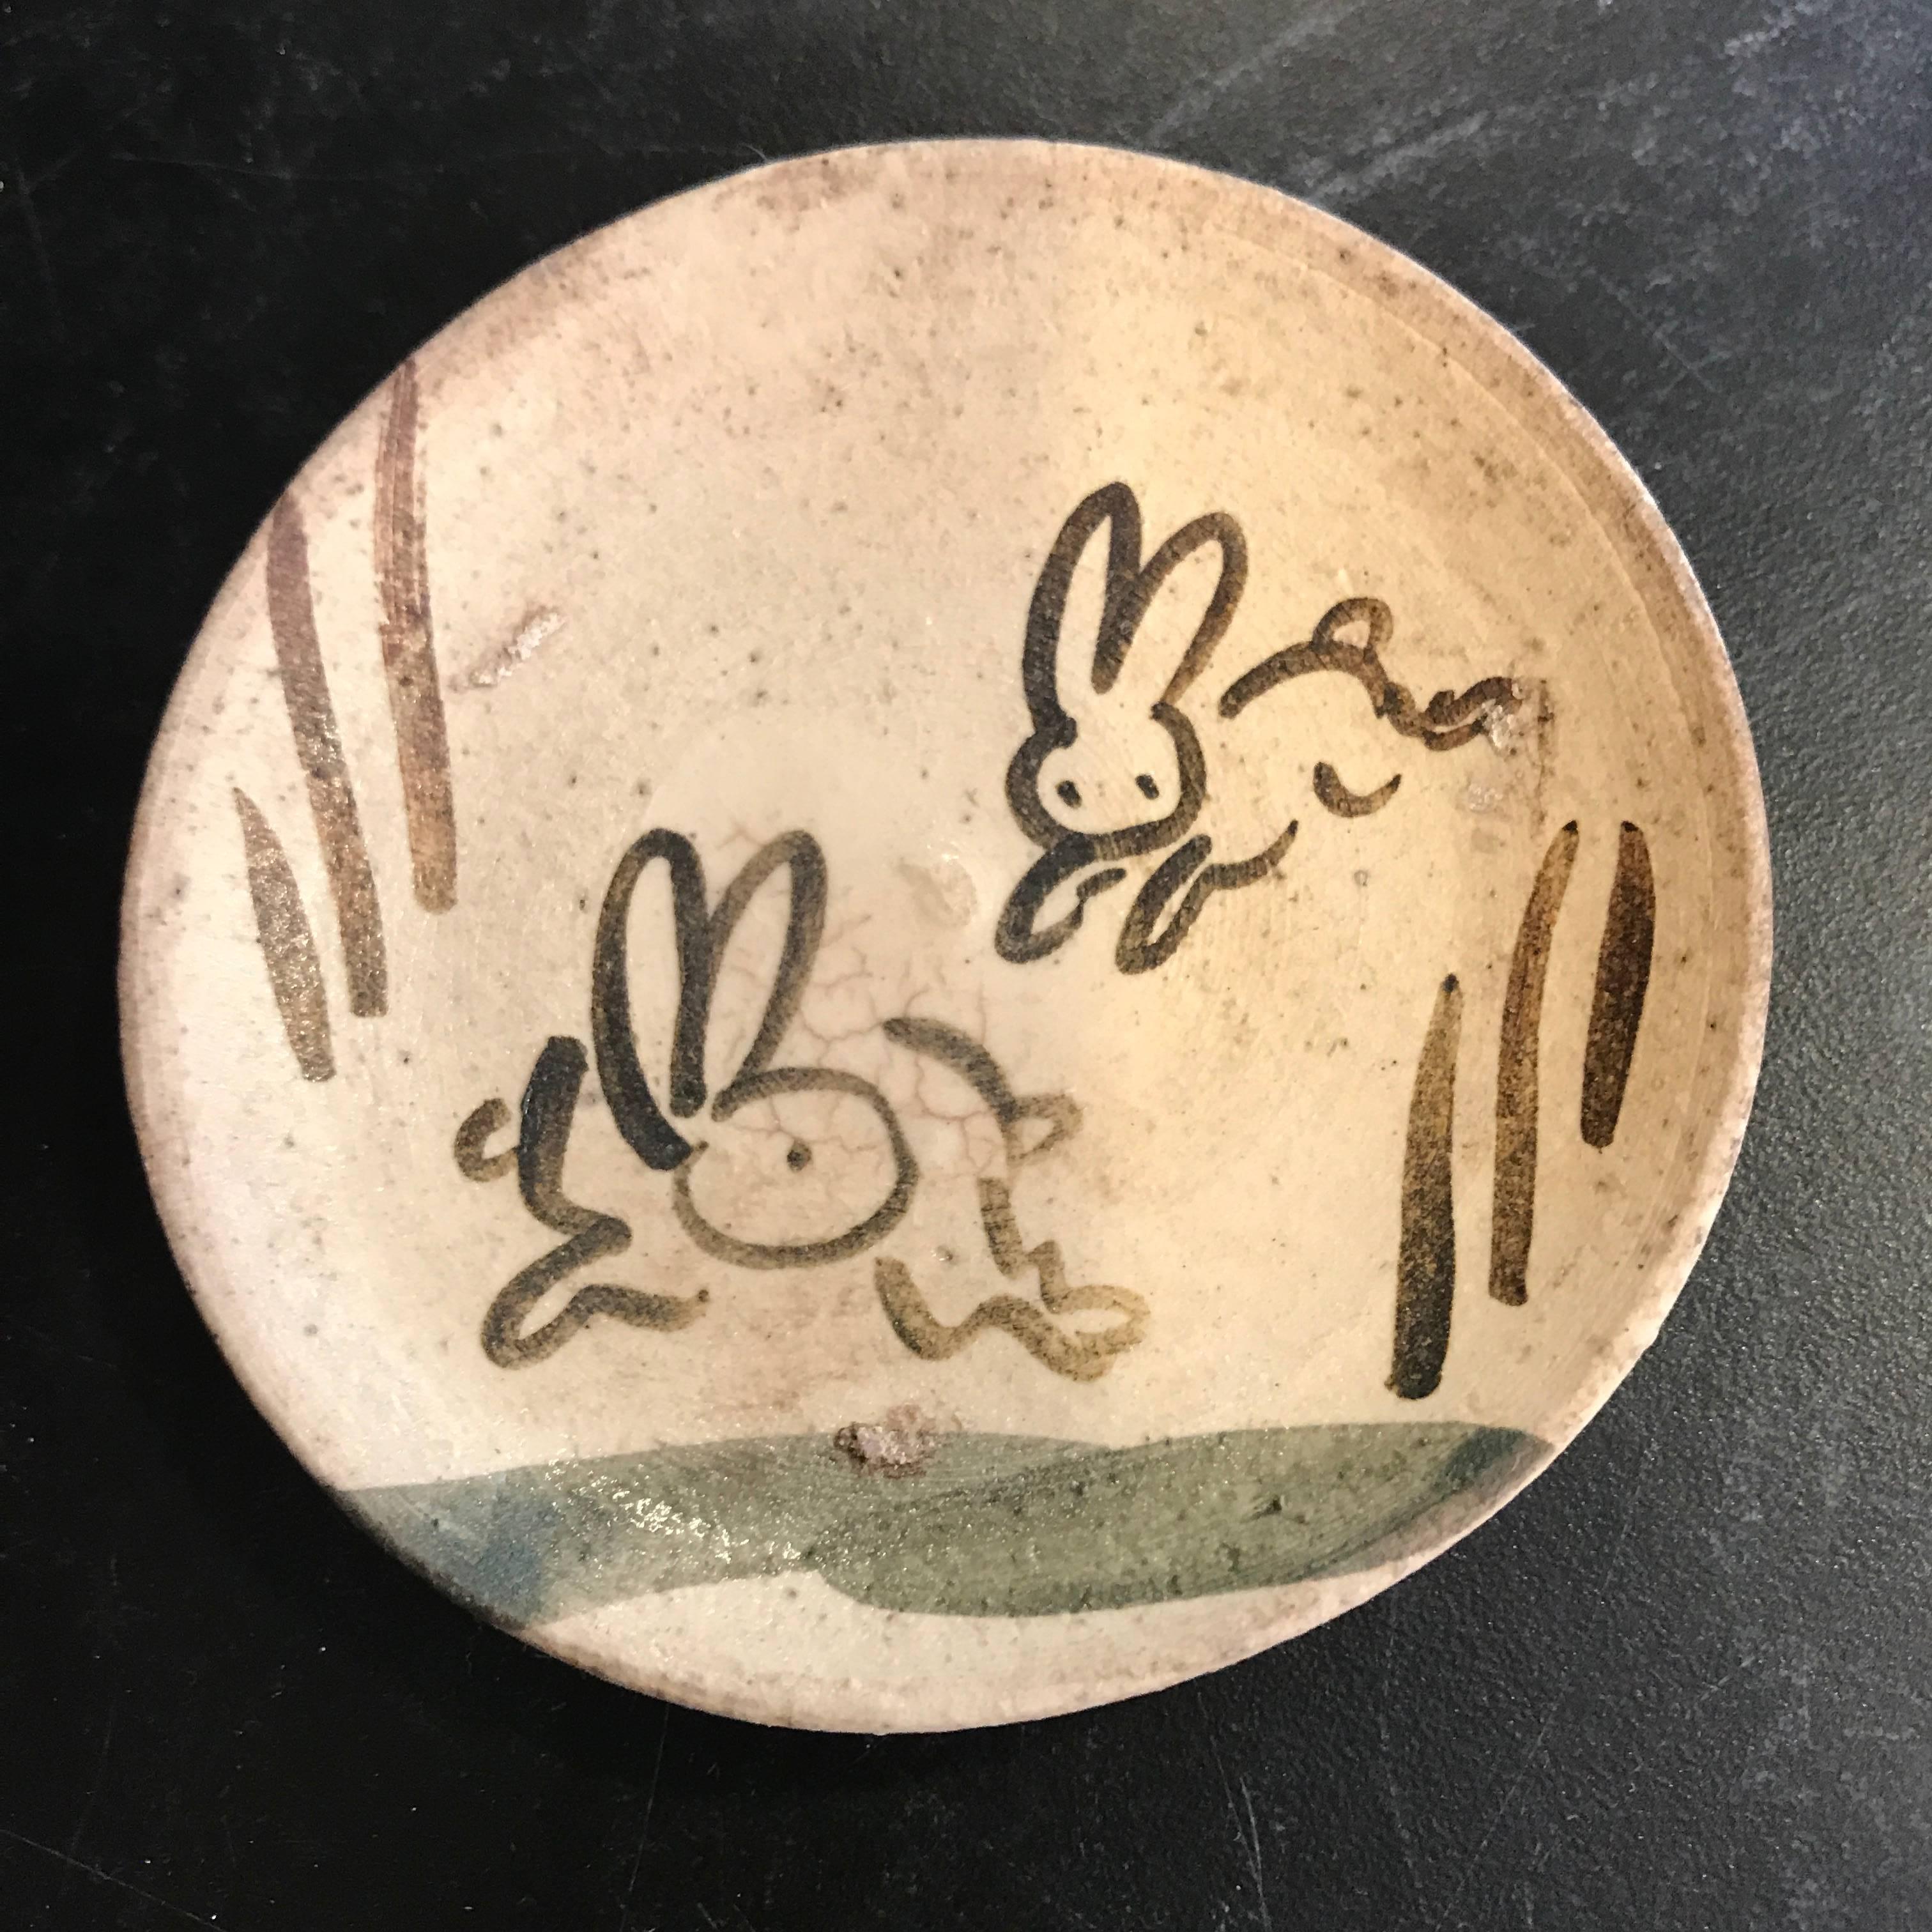 Japanese Old Japan Pair of Playful Rabbit Serving Plates Mint Condition